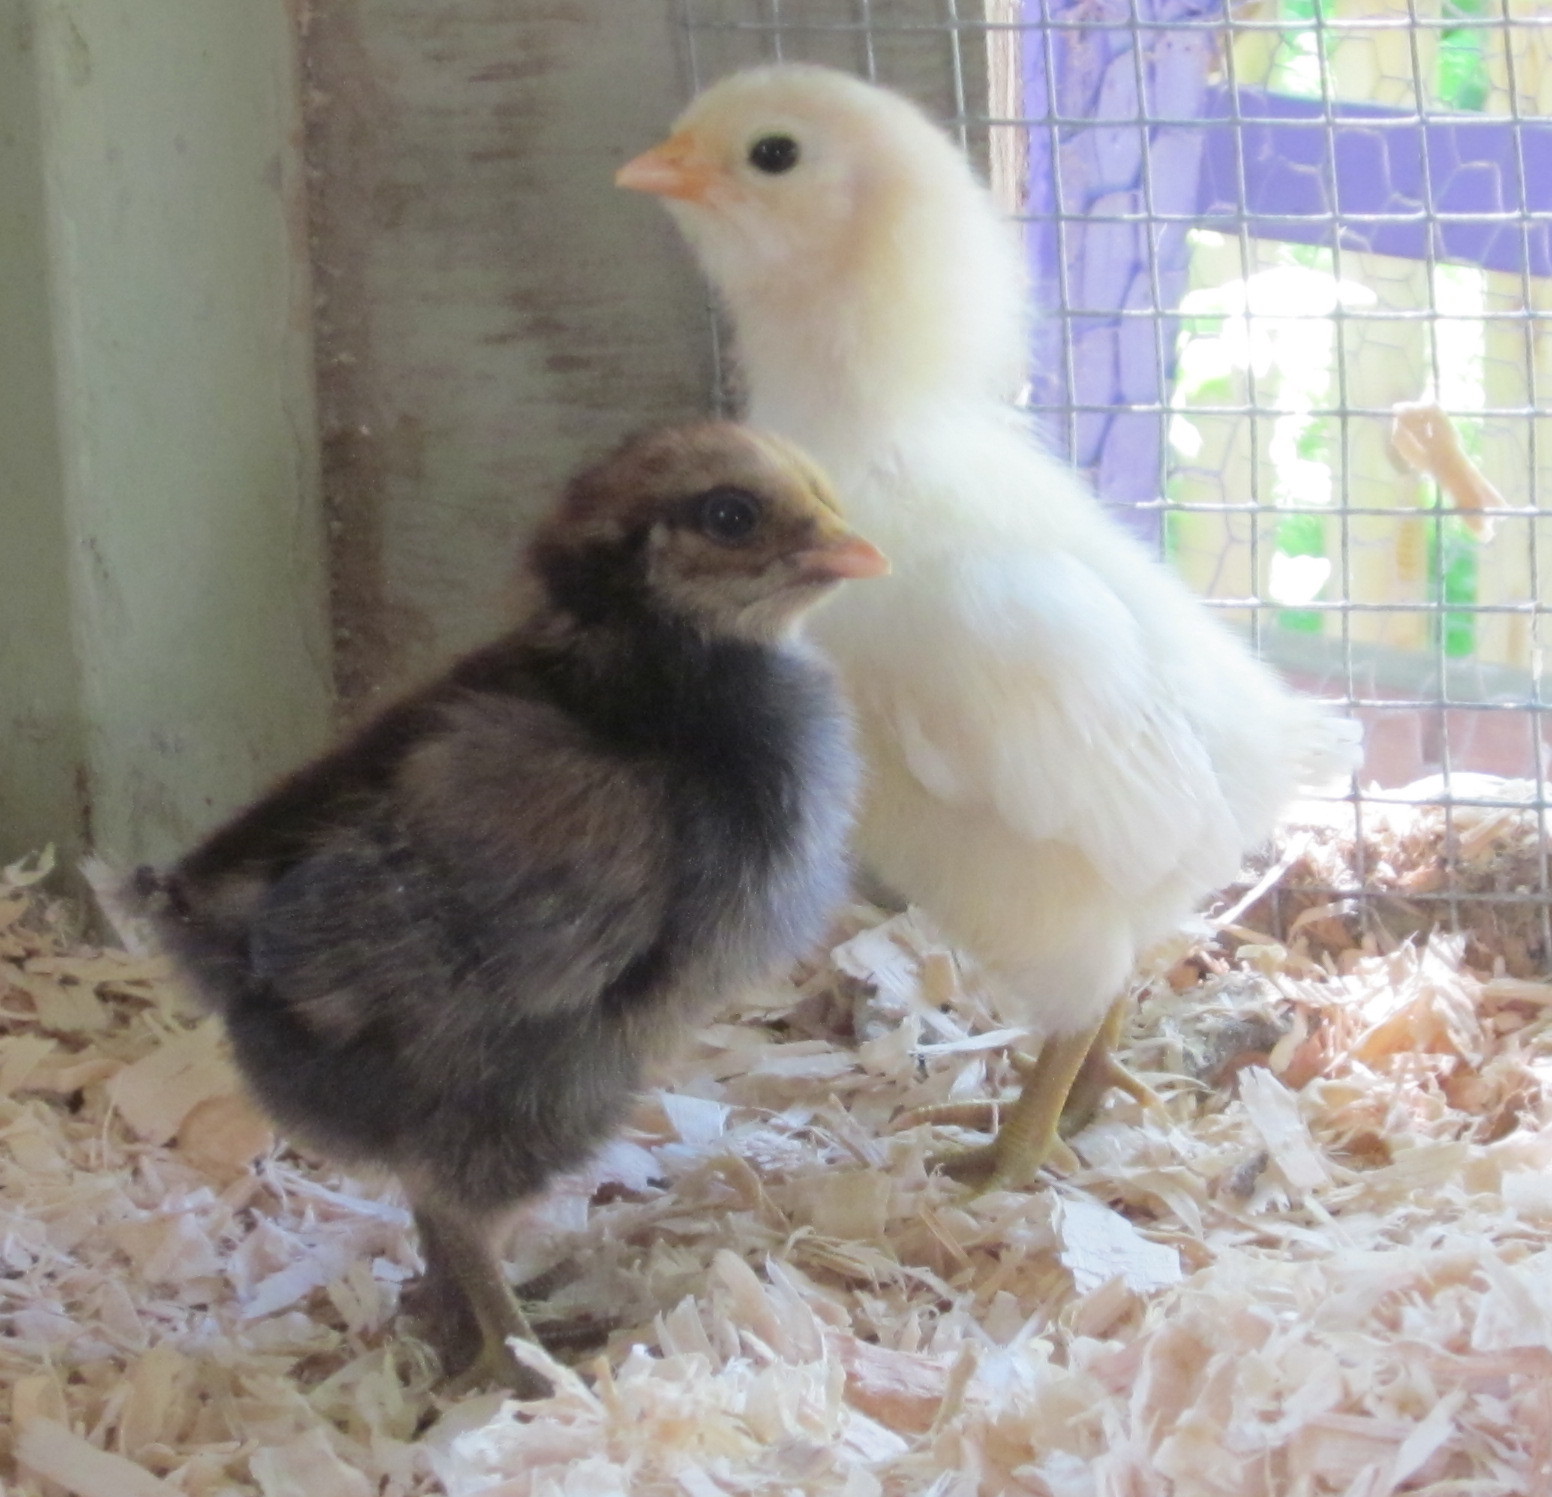 1 week old, both hatched from blue eggs that had been fertilized by a blue-egg rooster.